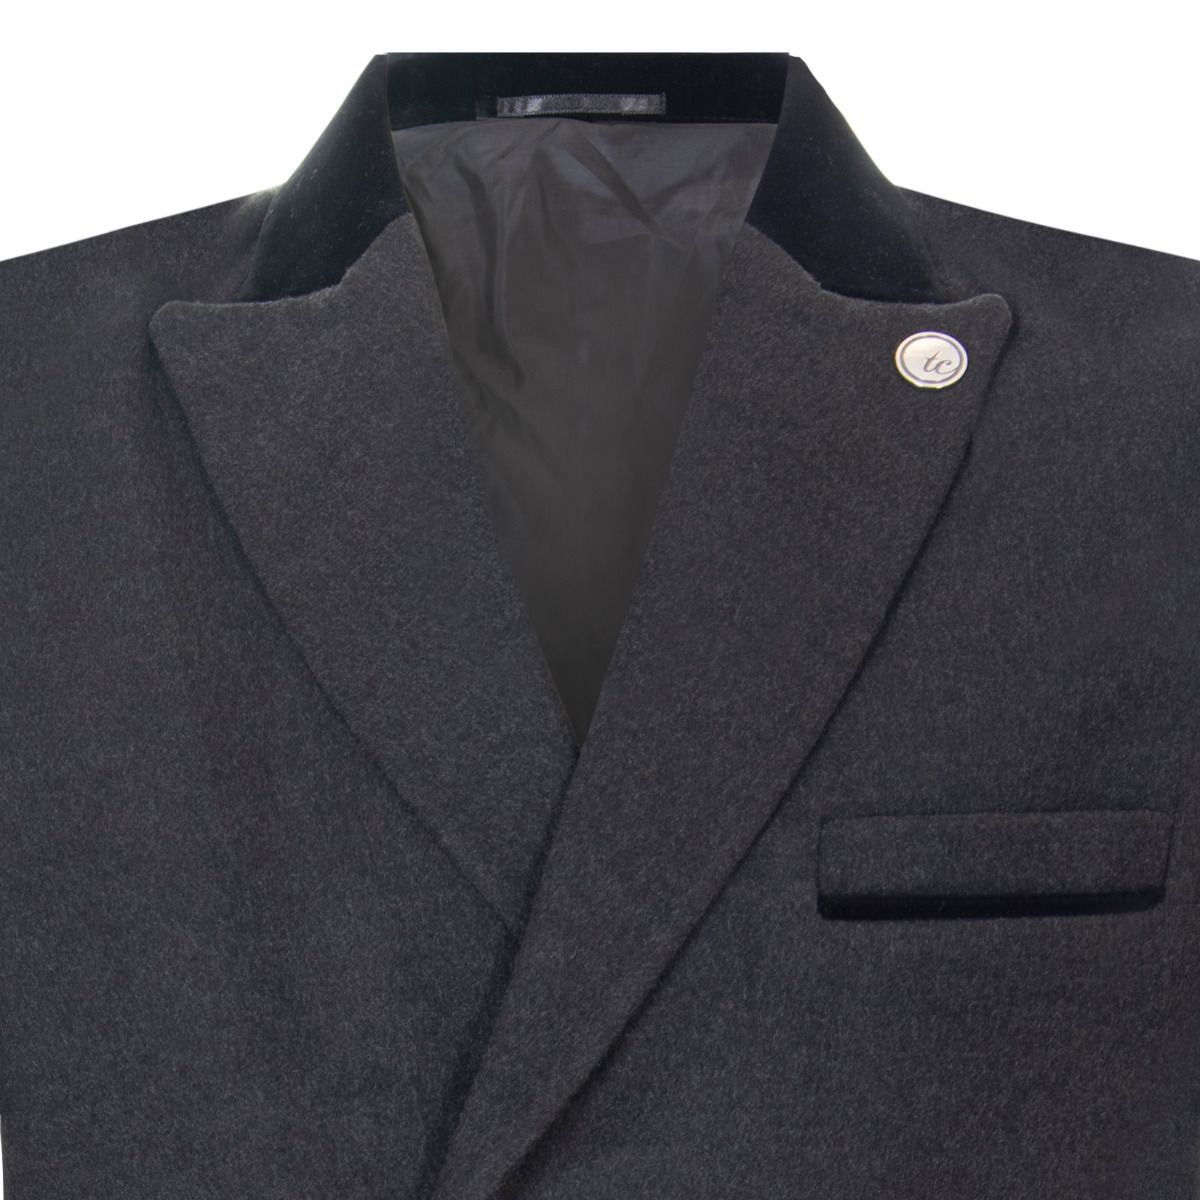 Mens 3/4 Grey Long Double Breasted Crombie Overcoat Wool Coat Peaky Blinders - Upperclass Fashions 